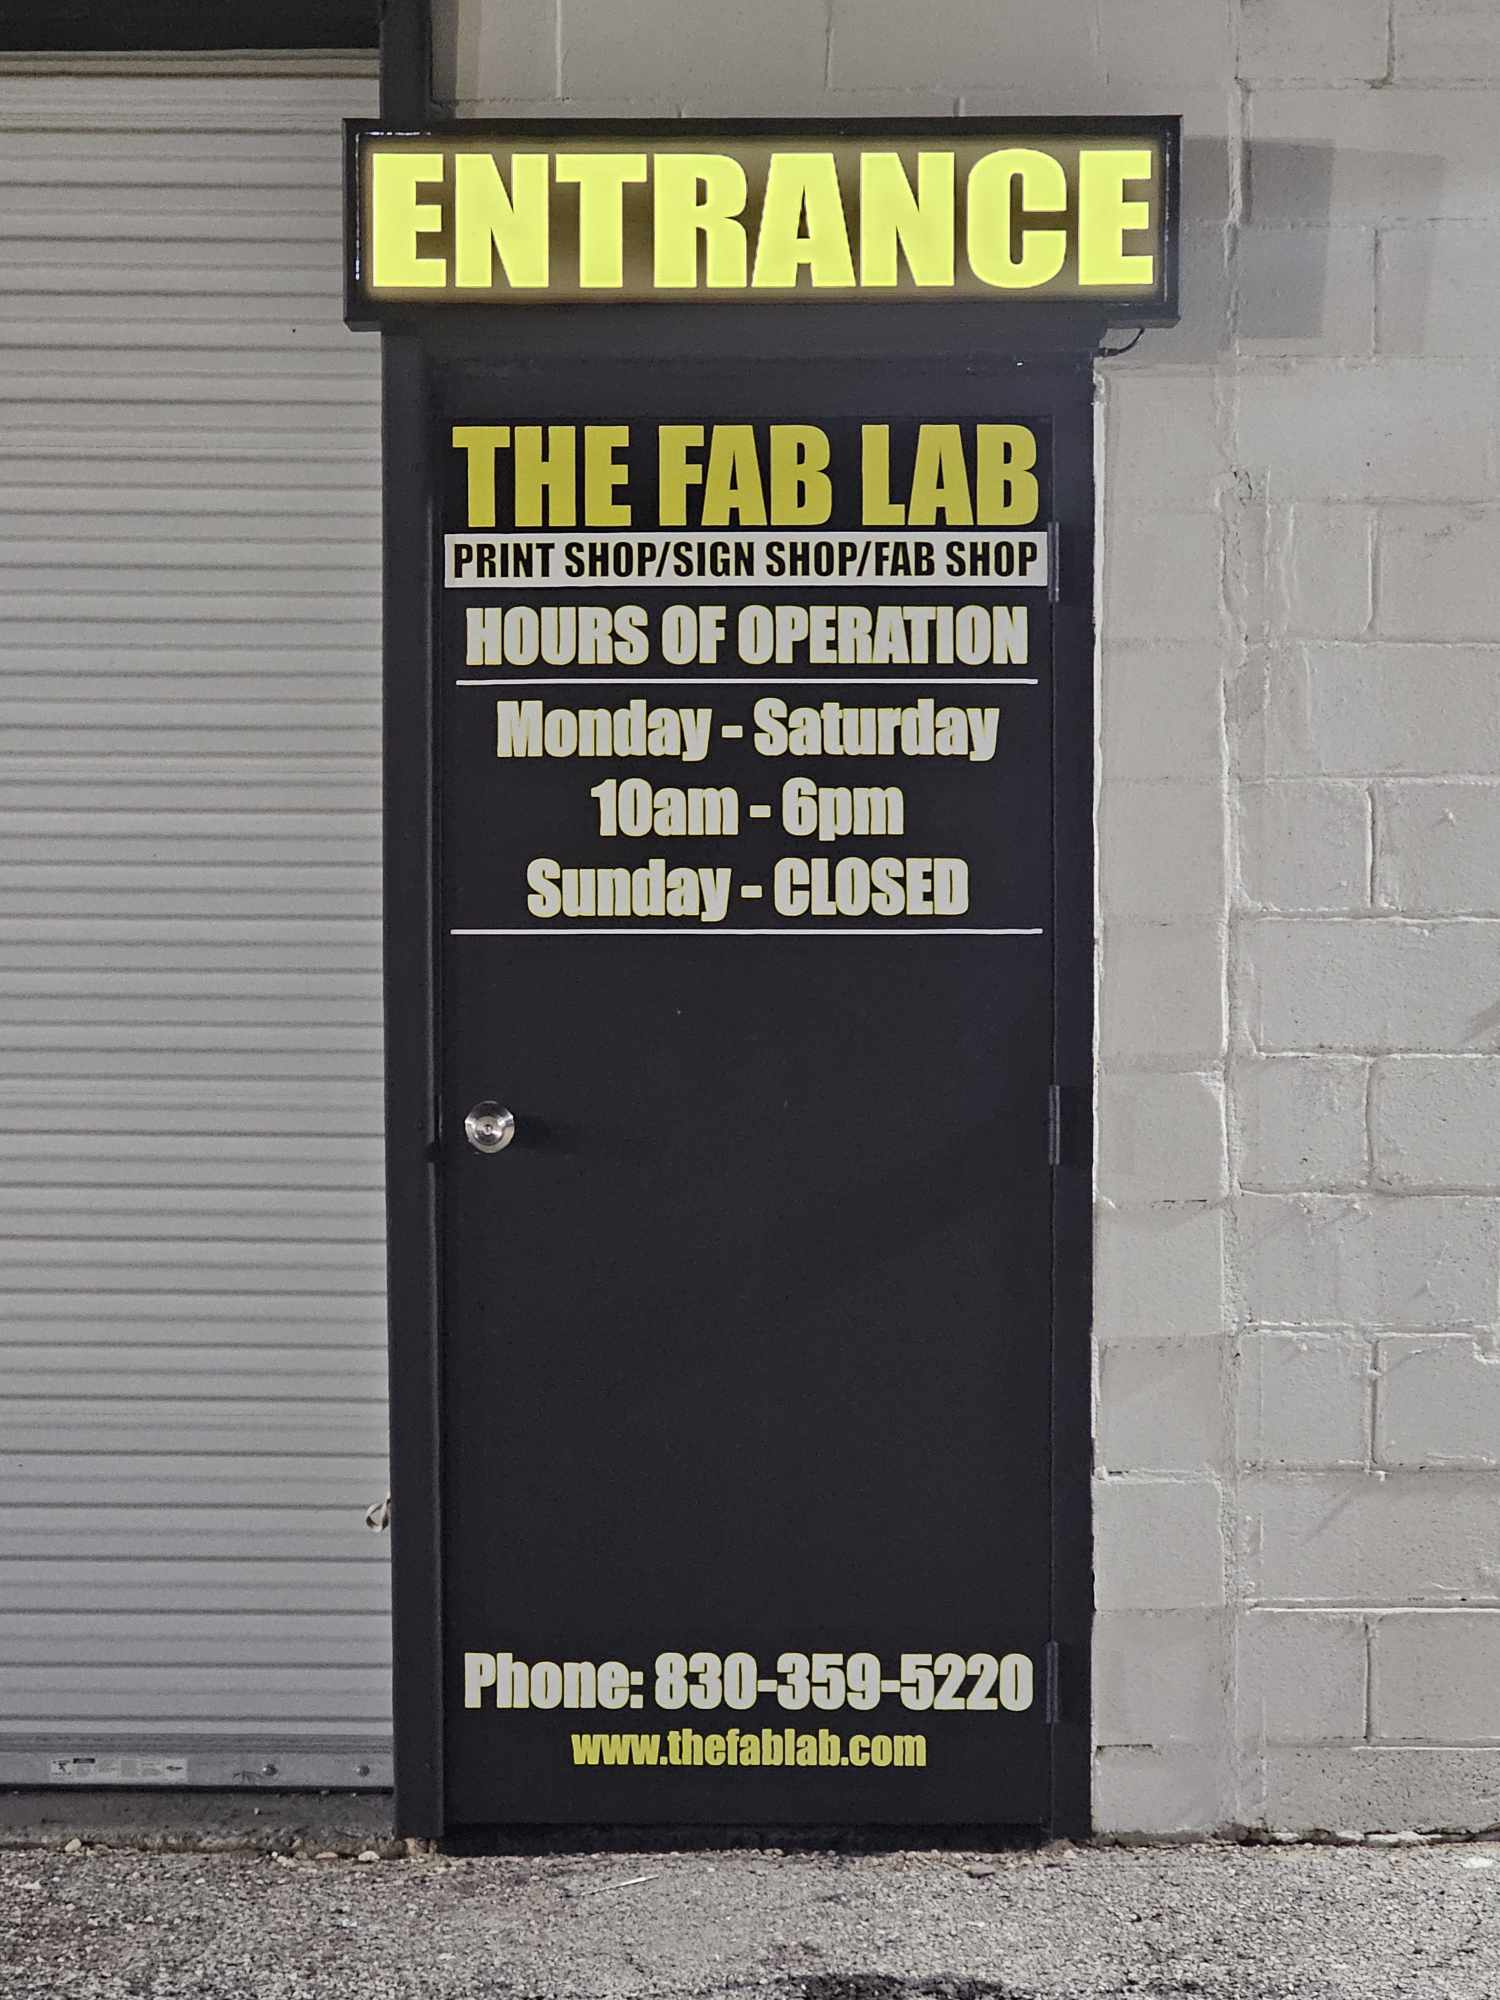 The entrance to The Fab Lab featuring a black door with business hours, contact information, and services listed.